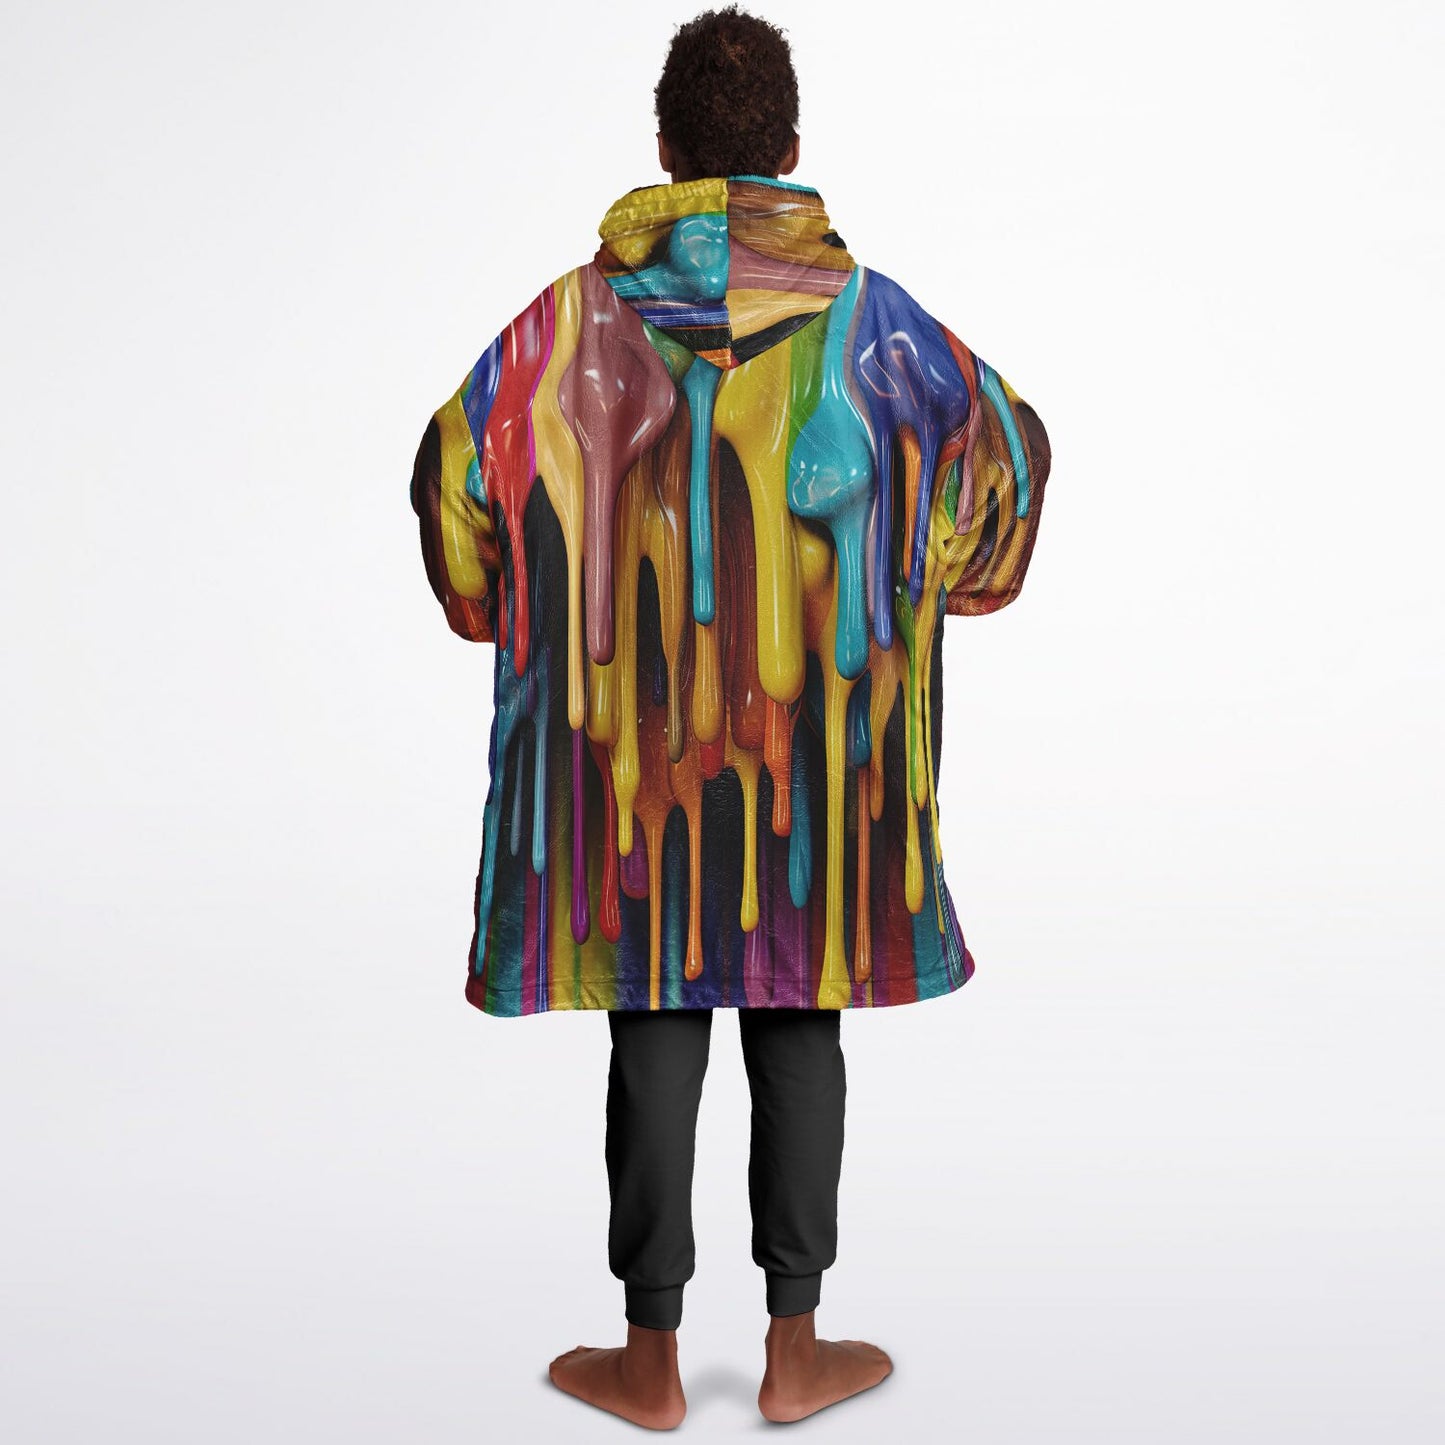 Youth Reversible Snug Hoodie, Paint Drips, Fruits Design, Abstract Art